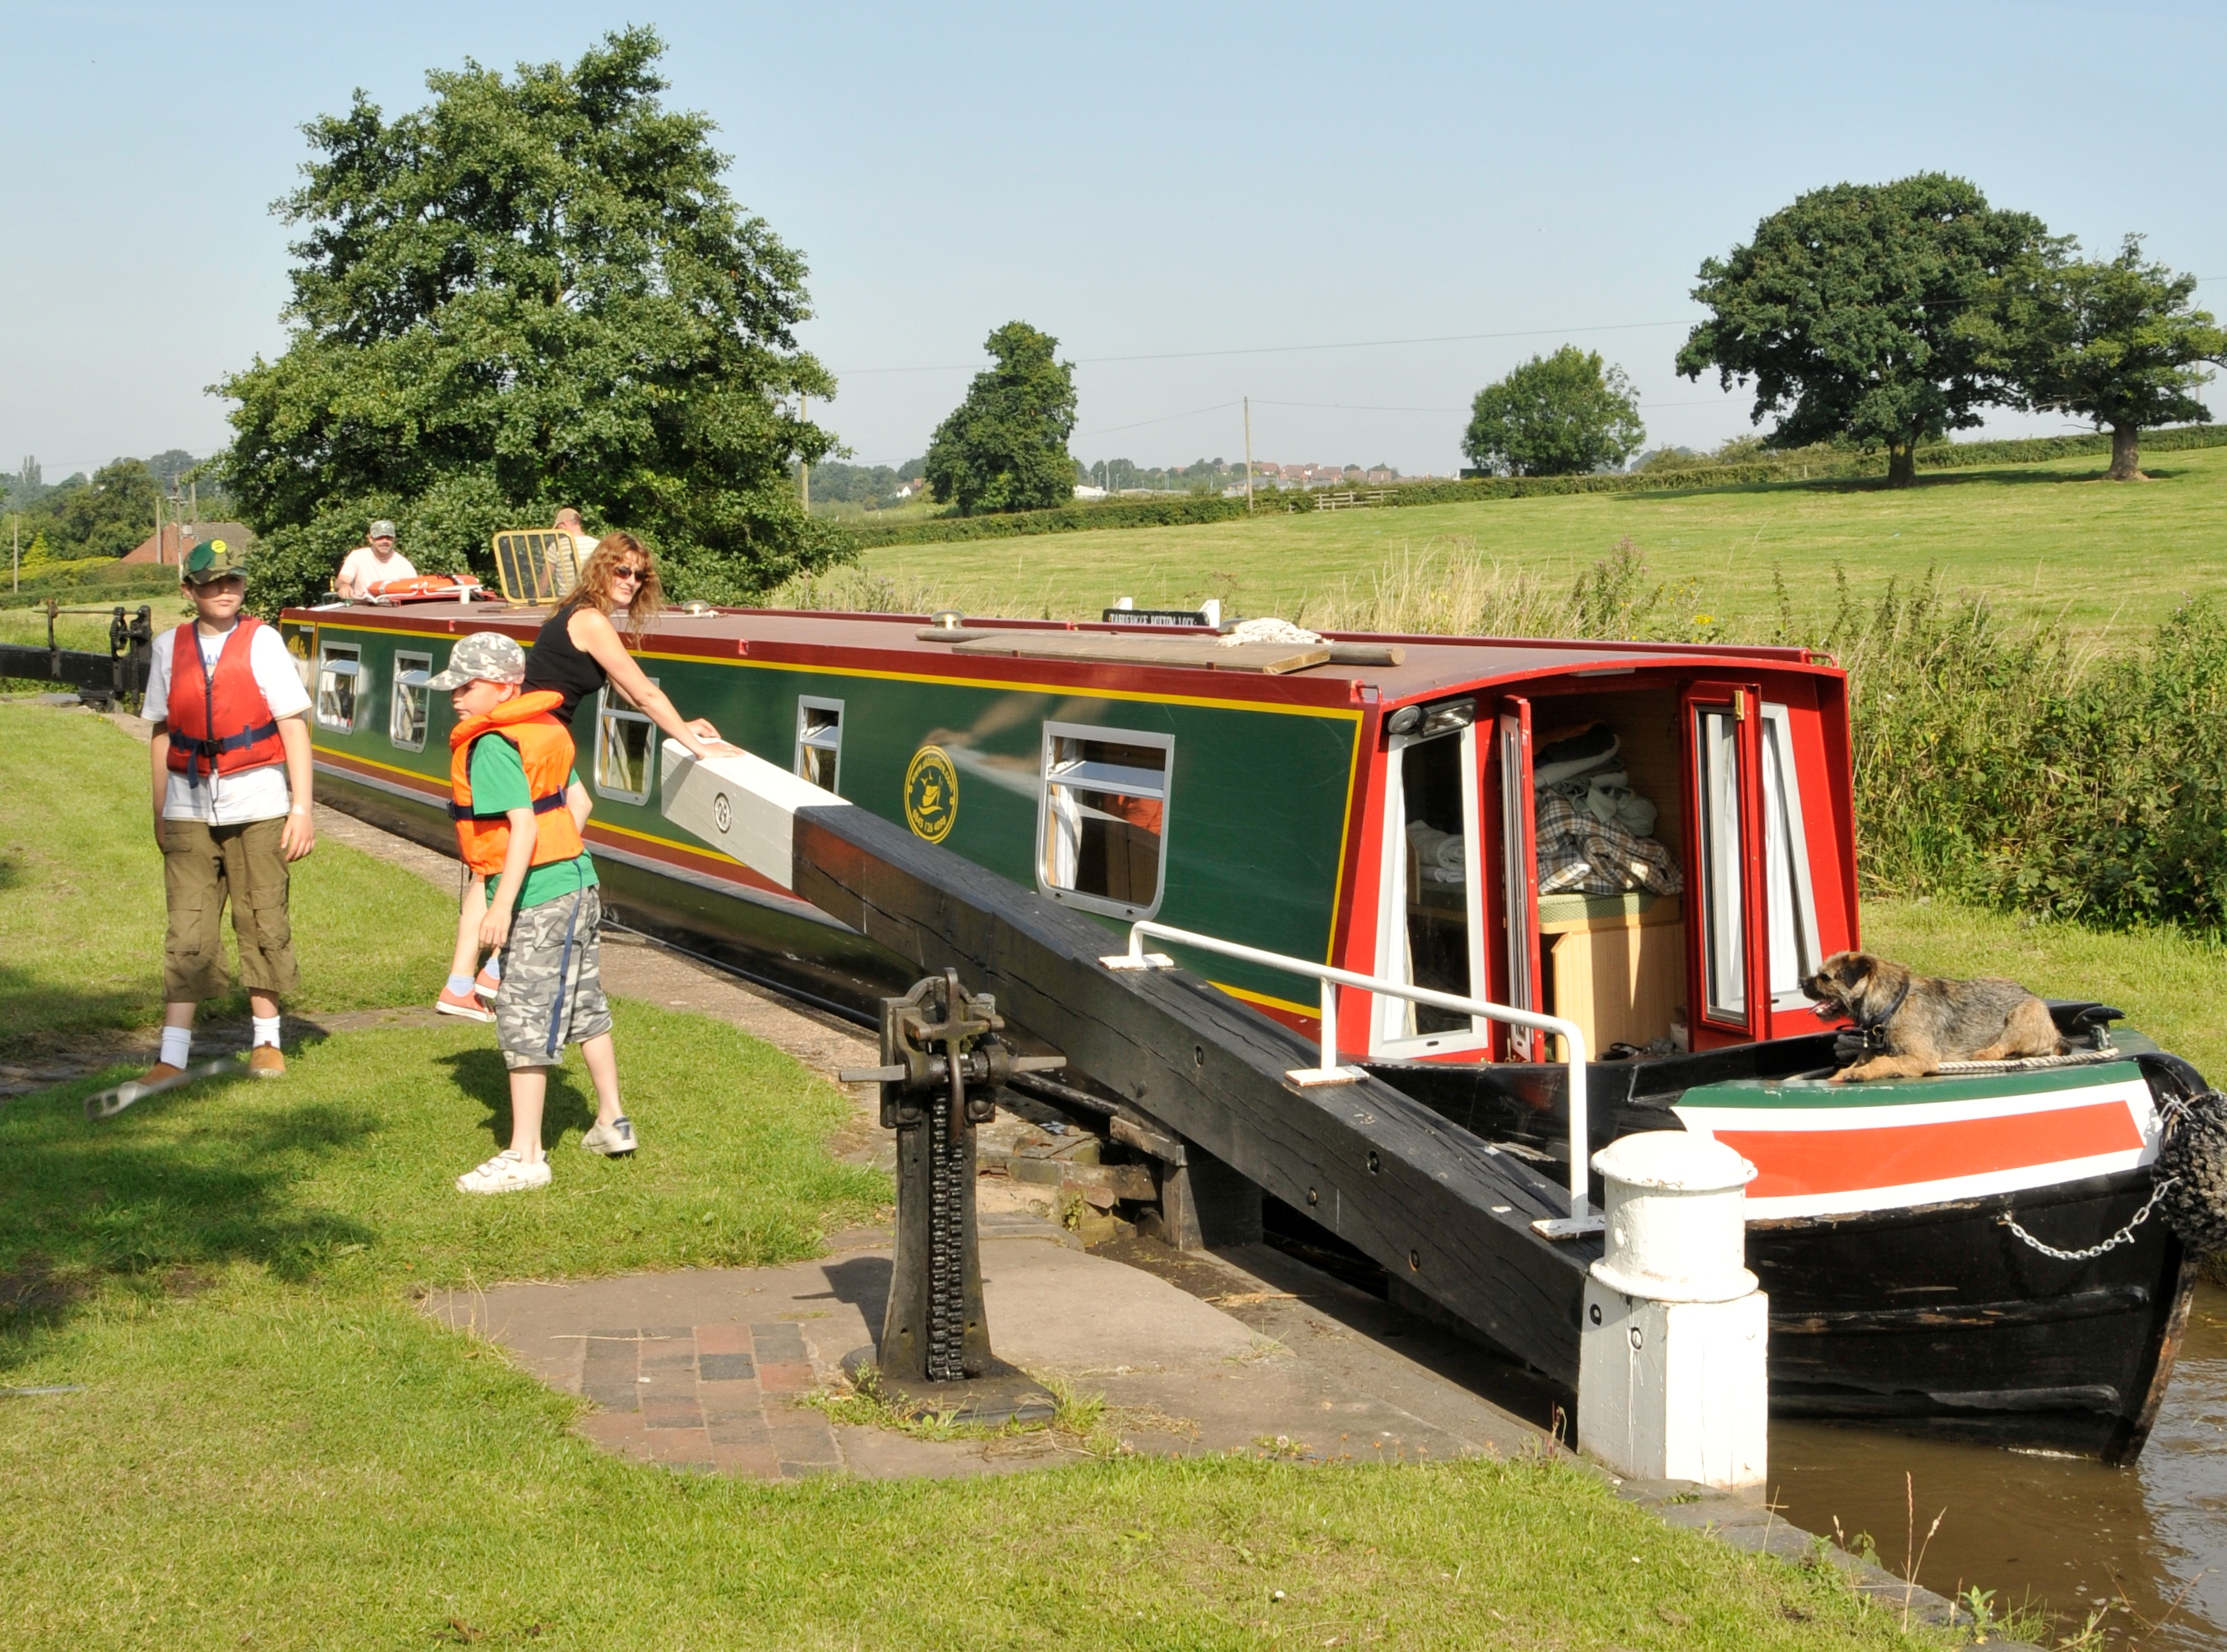 The Eagle class canal boat